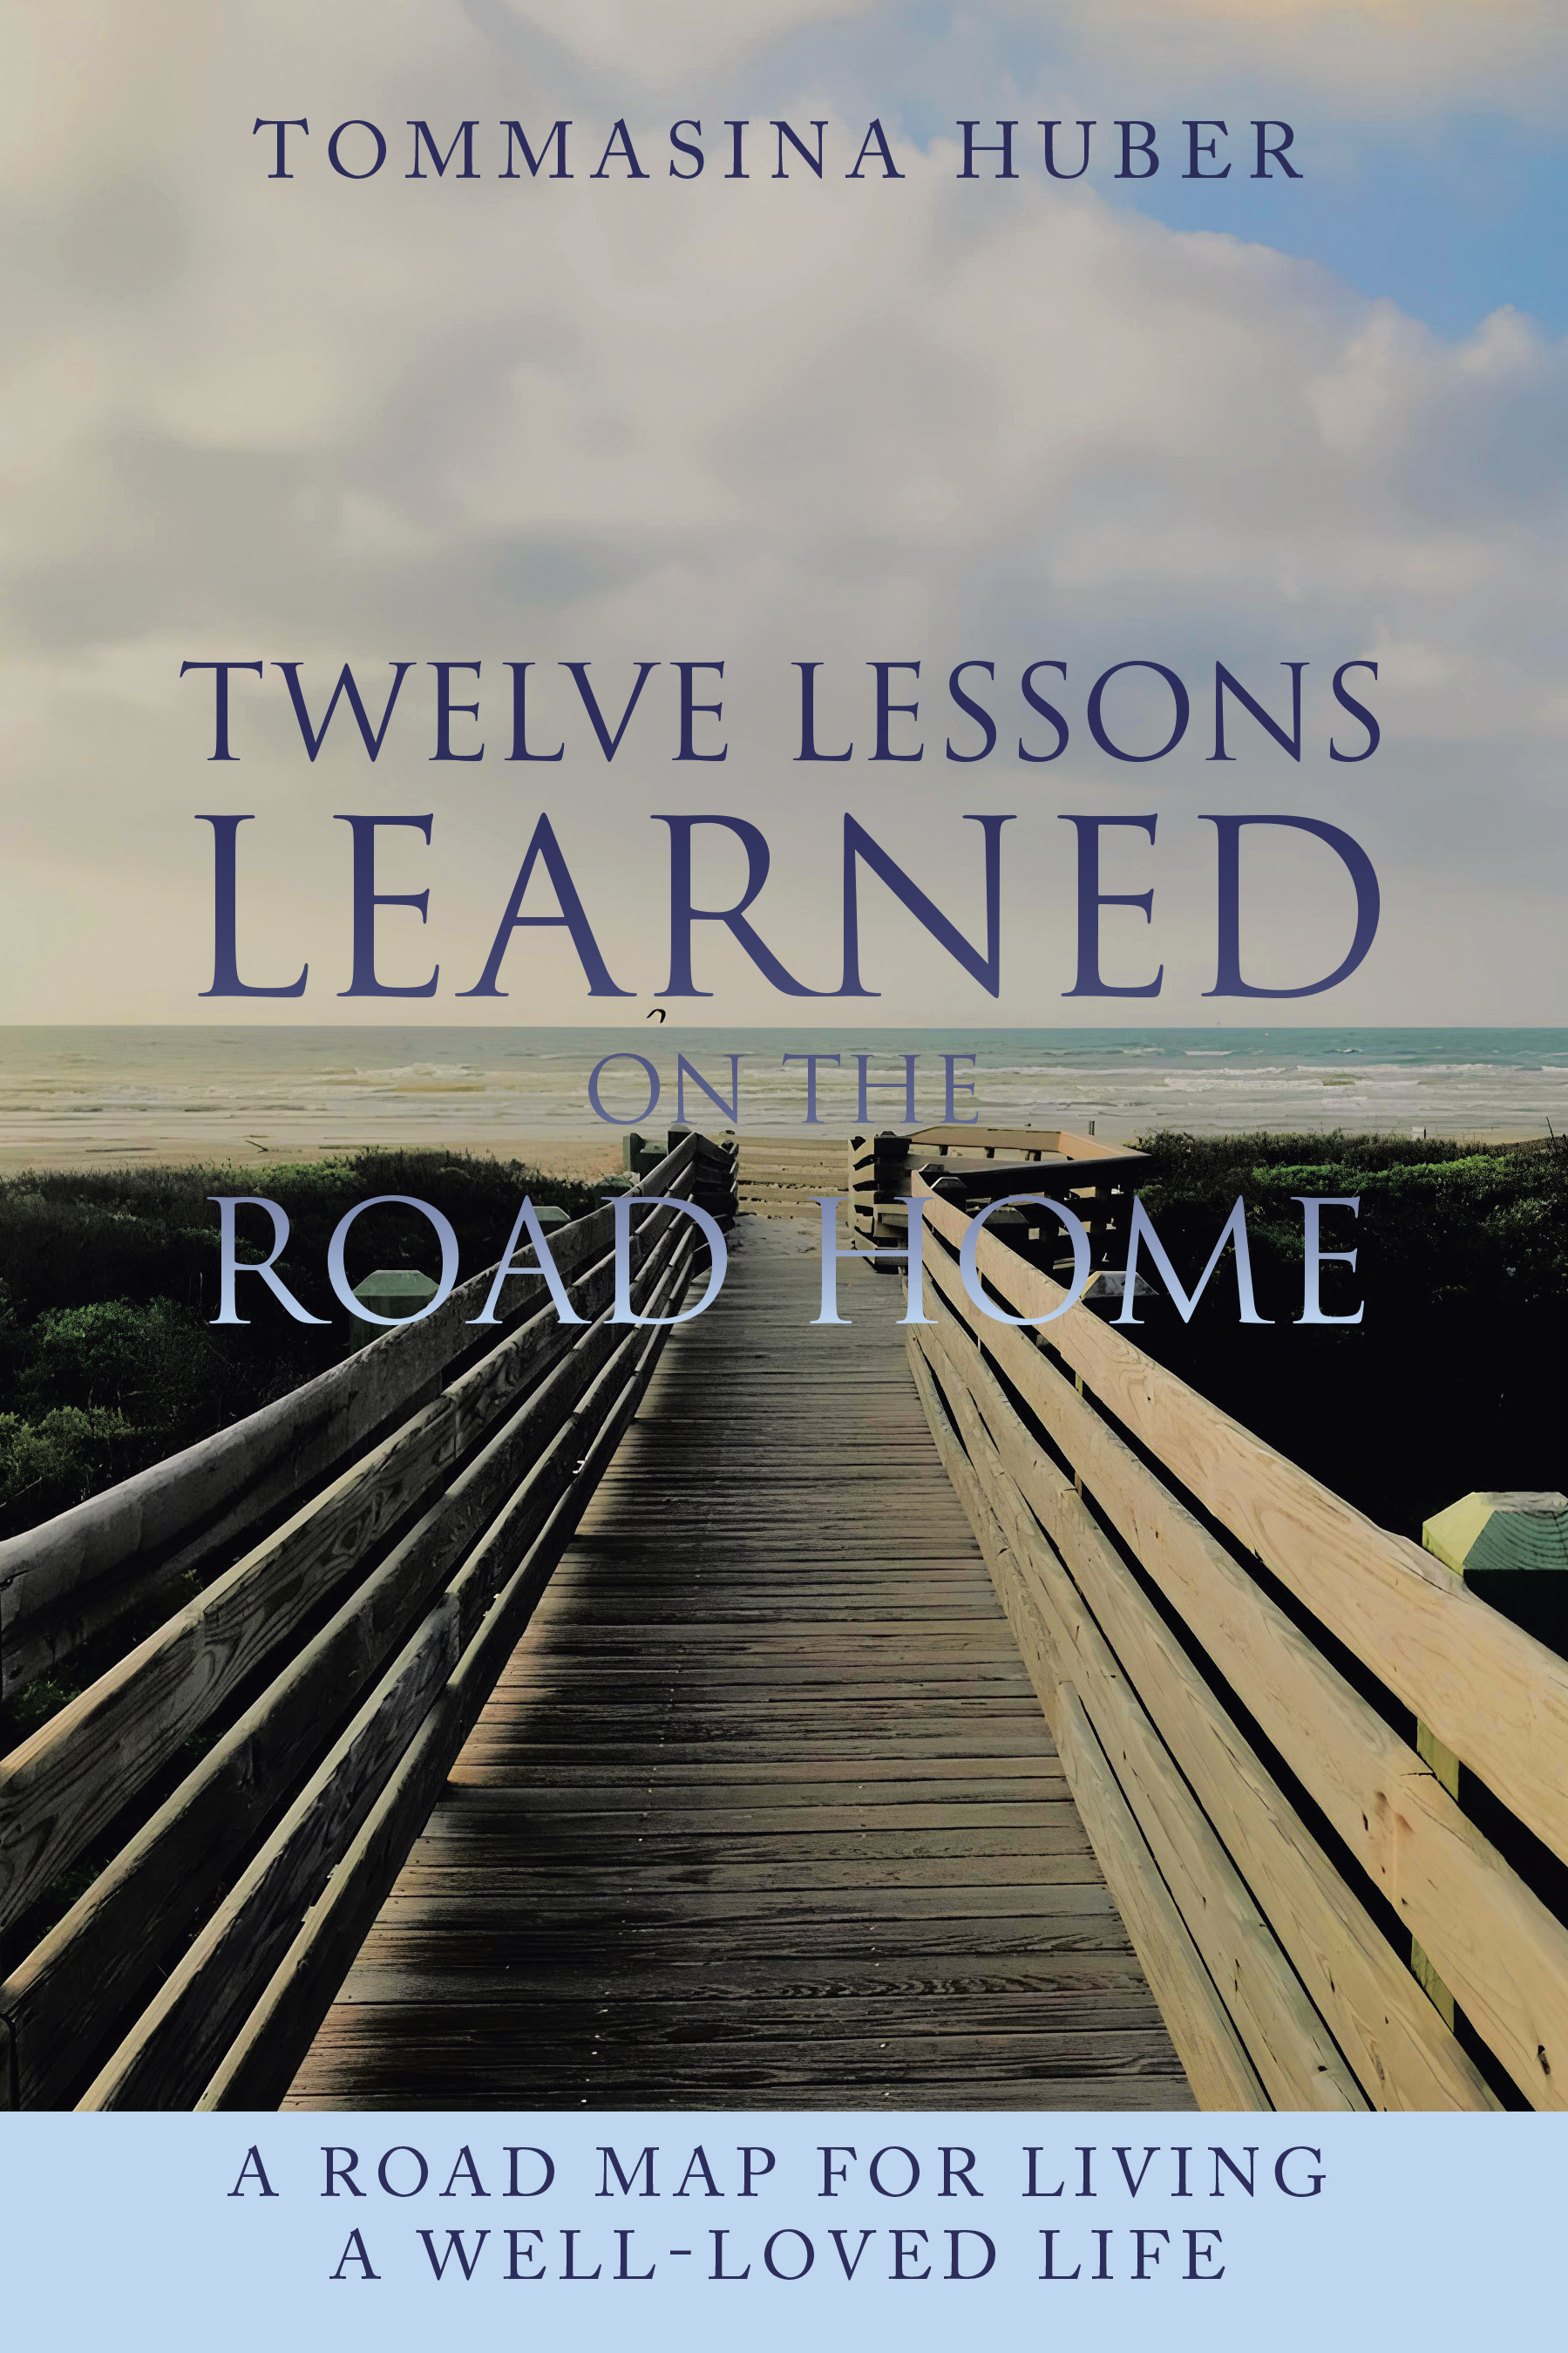 Author Tommasina Huber’s Newly Released “Twelve Lessons Learned On The Road Home” Explores the Reflections, Wisdom, and Lessons Learned from Those Close to Passing on